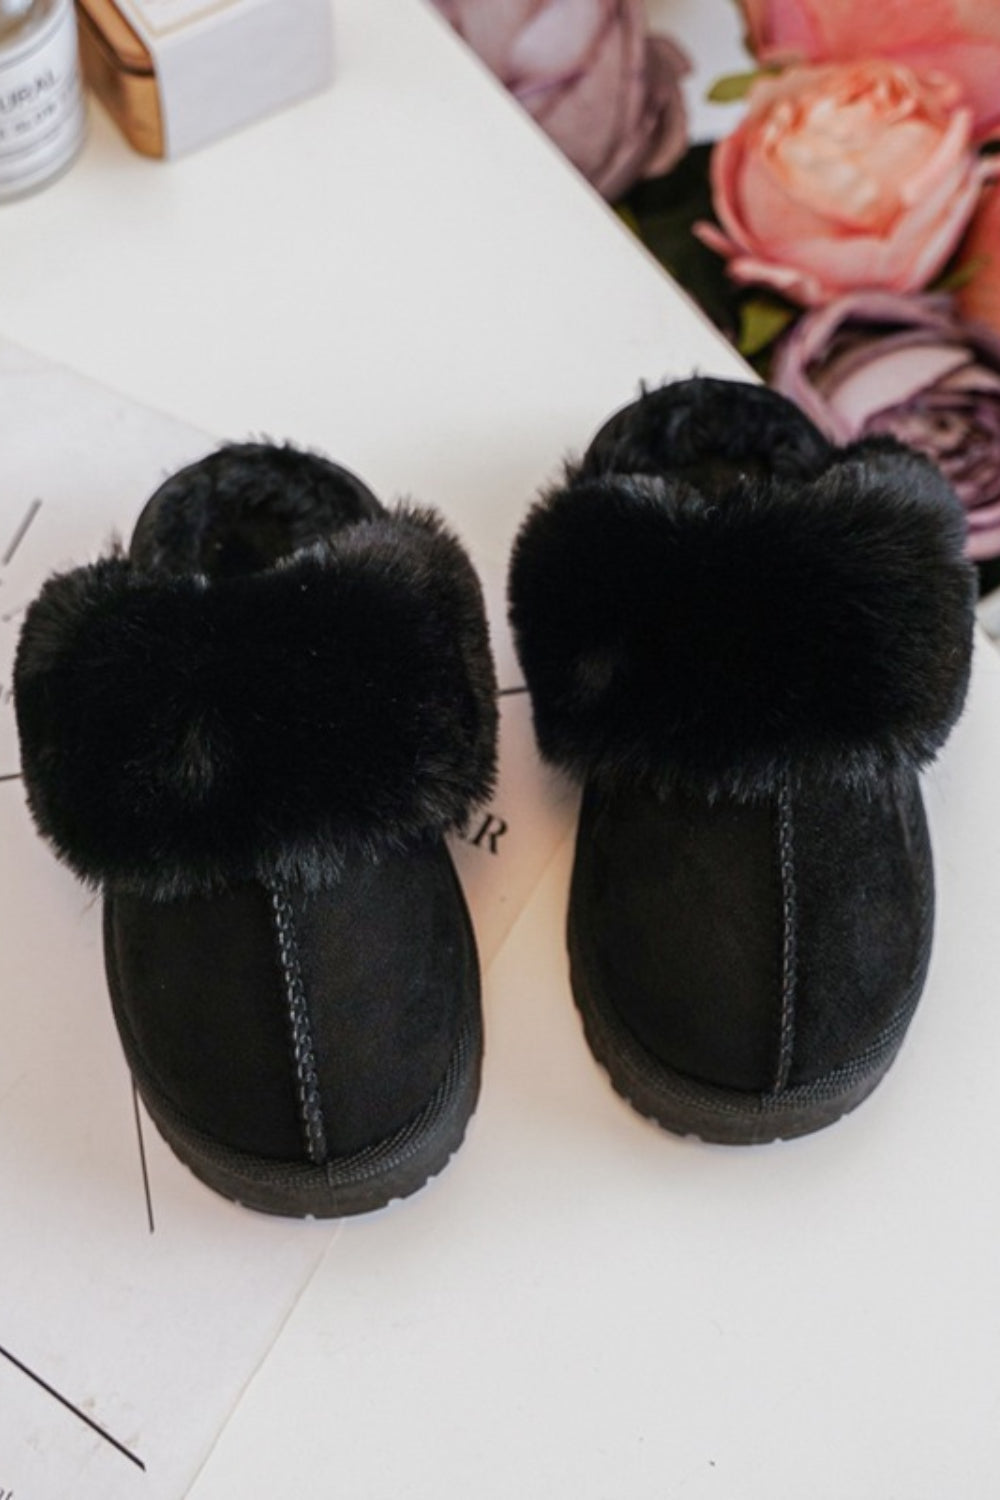 KIDS BLACK SLIPPERS WITH FAUX FUR COLLAR SIZE 31-36